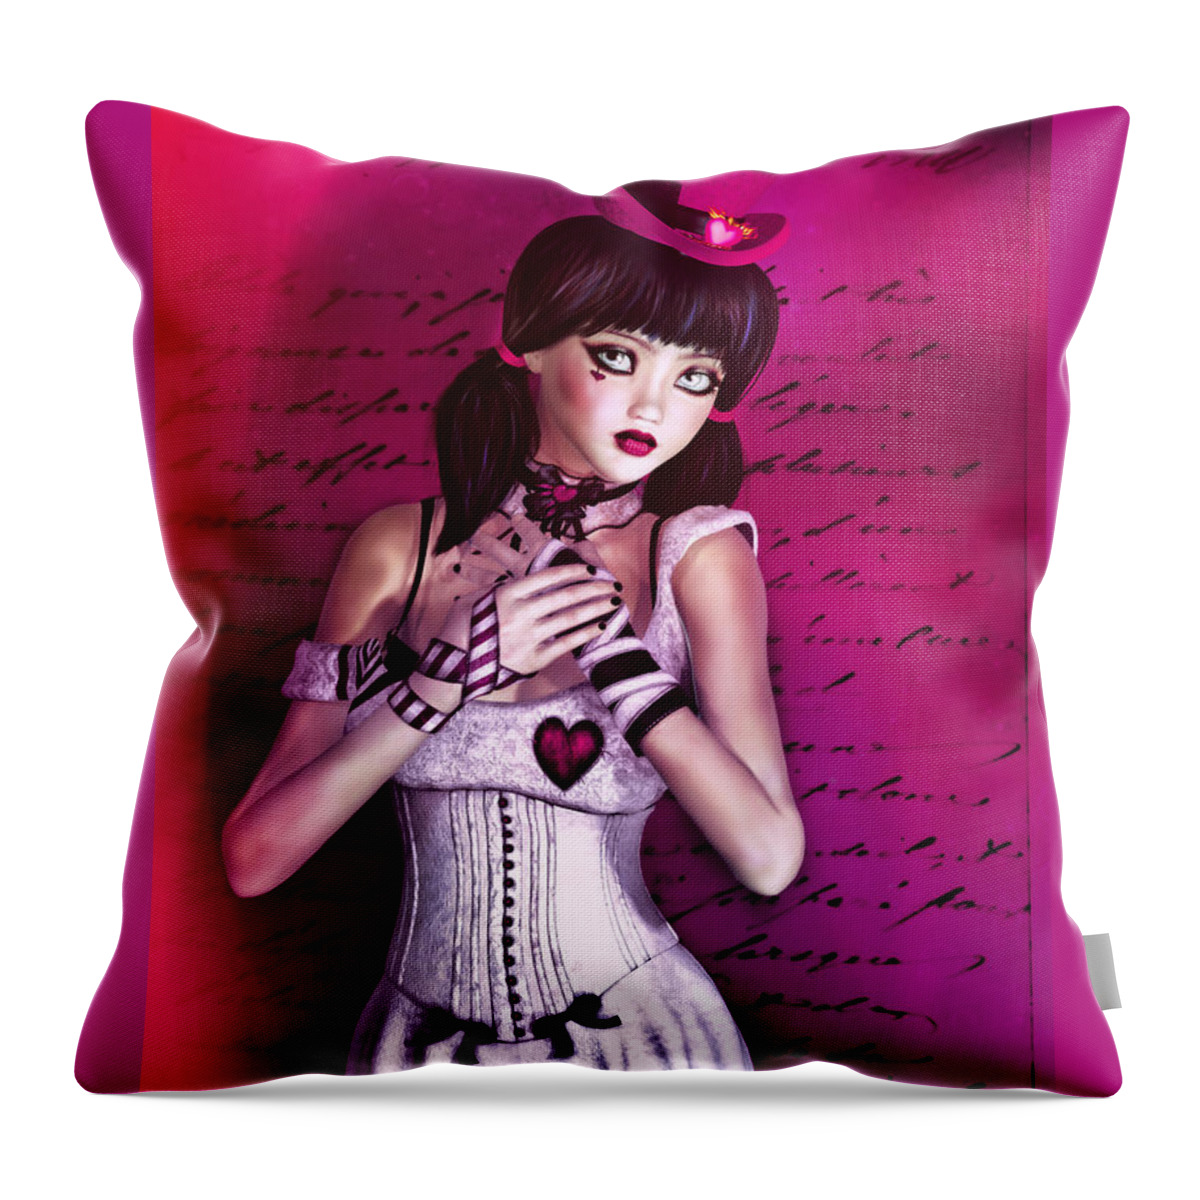 Girl Throw Pillow featuring the digital art Love doll by Alicia Hollinger